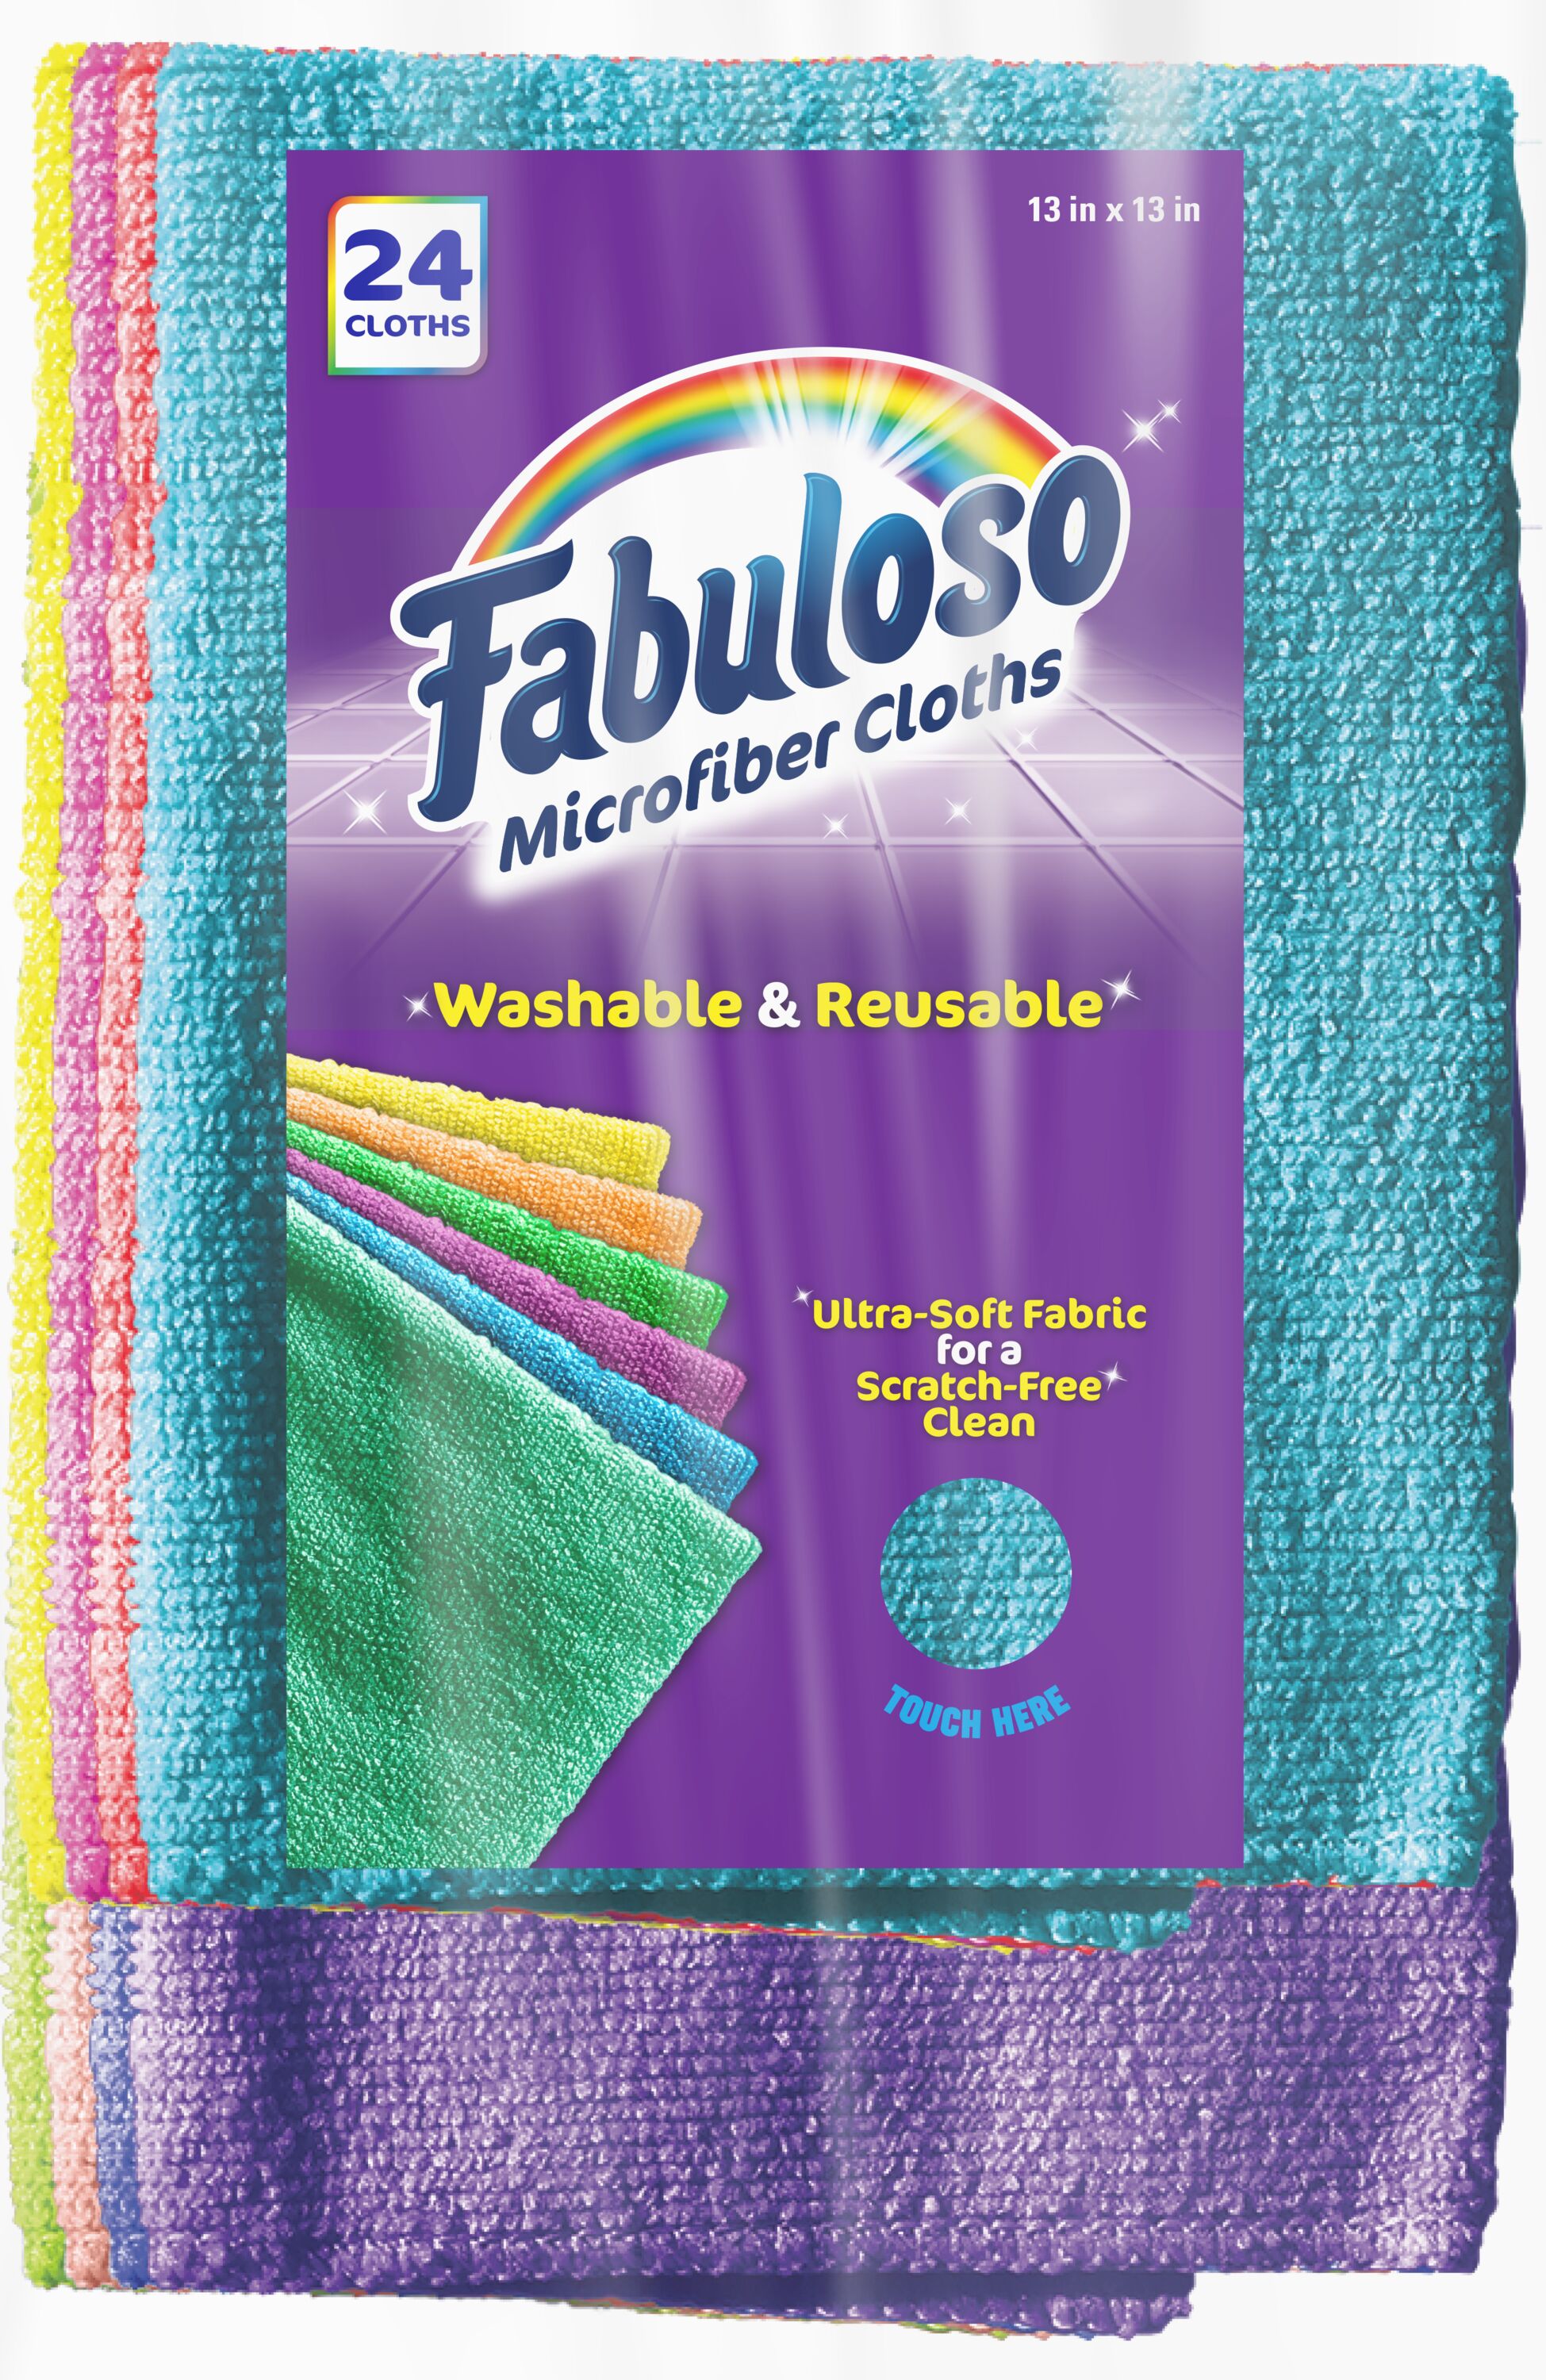 Soft Touch Microfiber Cleaning Cloth